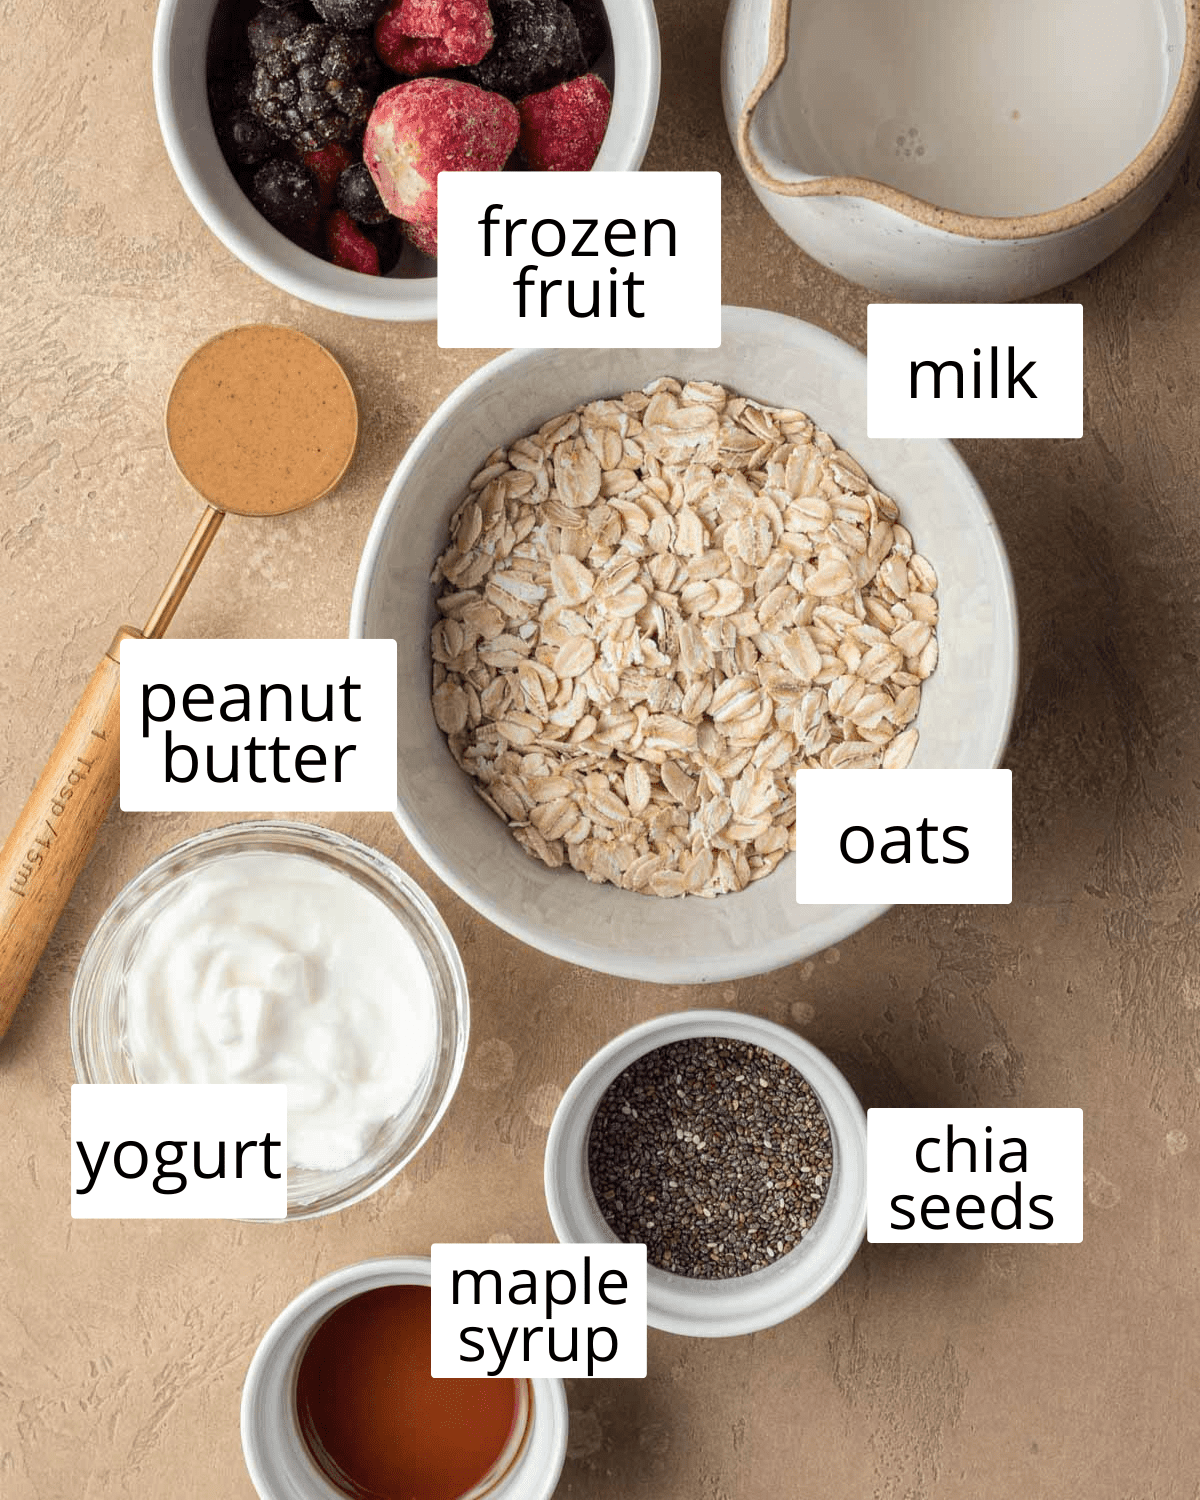 Ingredients to make overnight oats with frozen fruit.